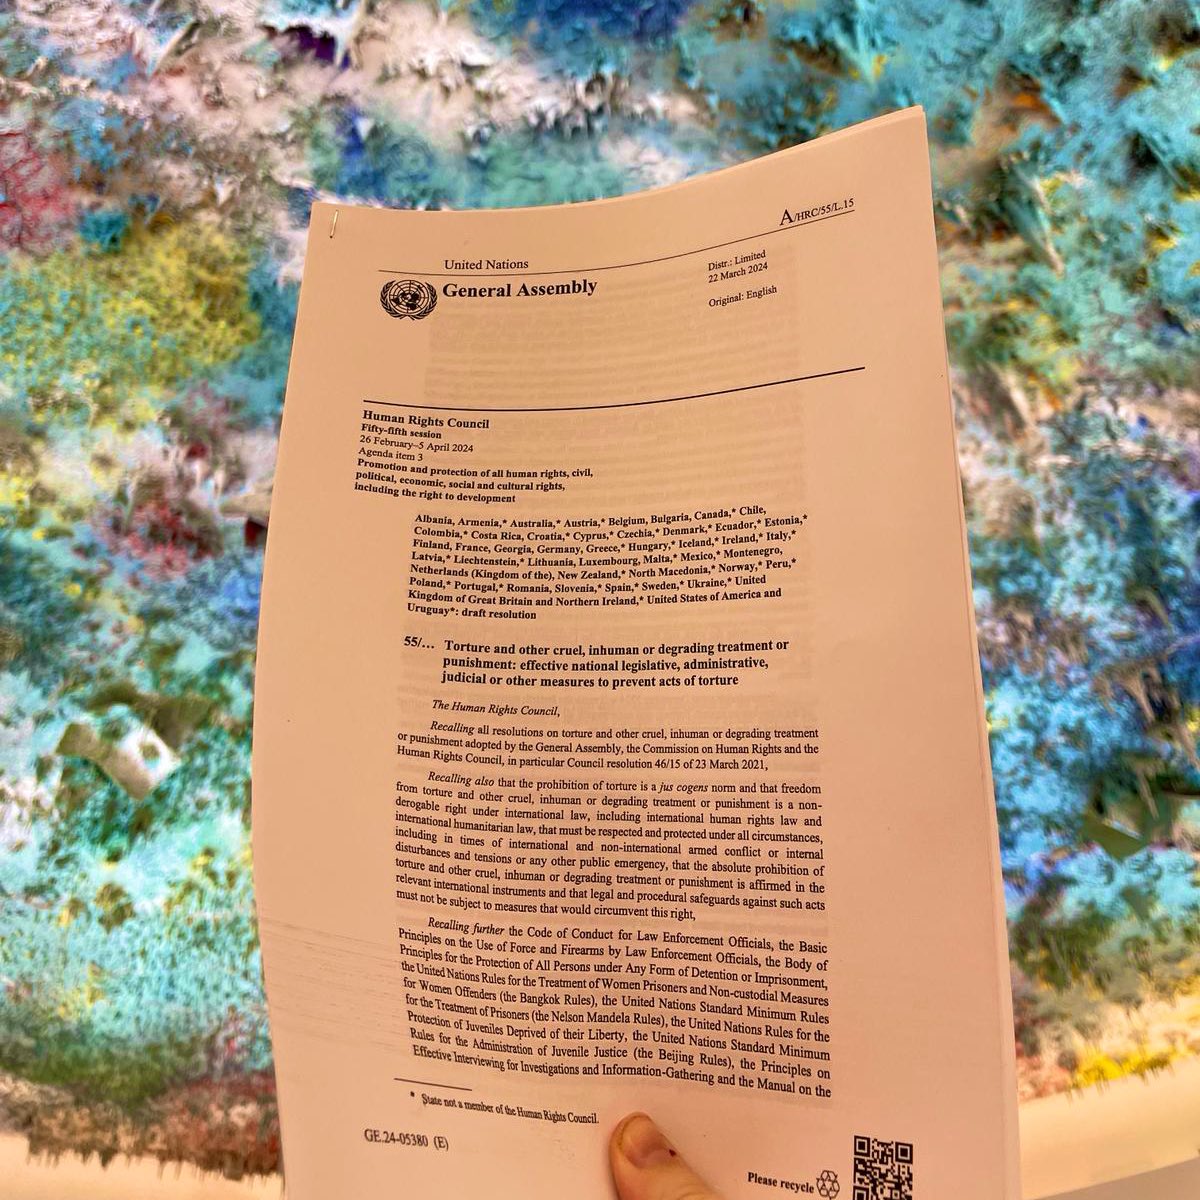 Danish-led #HRC55 resolution on national measures to prevent torture was just adopted by consensus at @UN_HRC! 🇩🇰 has been a proud penholder of 🇺🇳 resolutions on torture for 25+ years. Torture remains a top priority & we will continue to work to protect the dignity of all 🌍